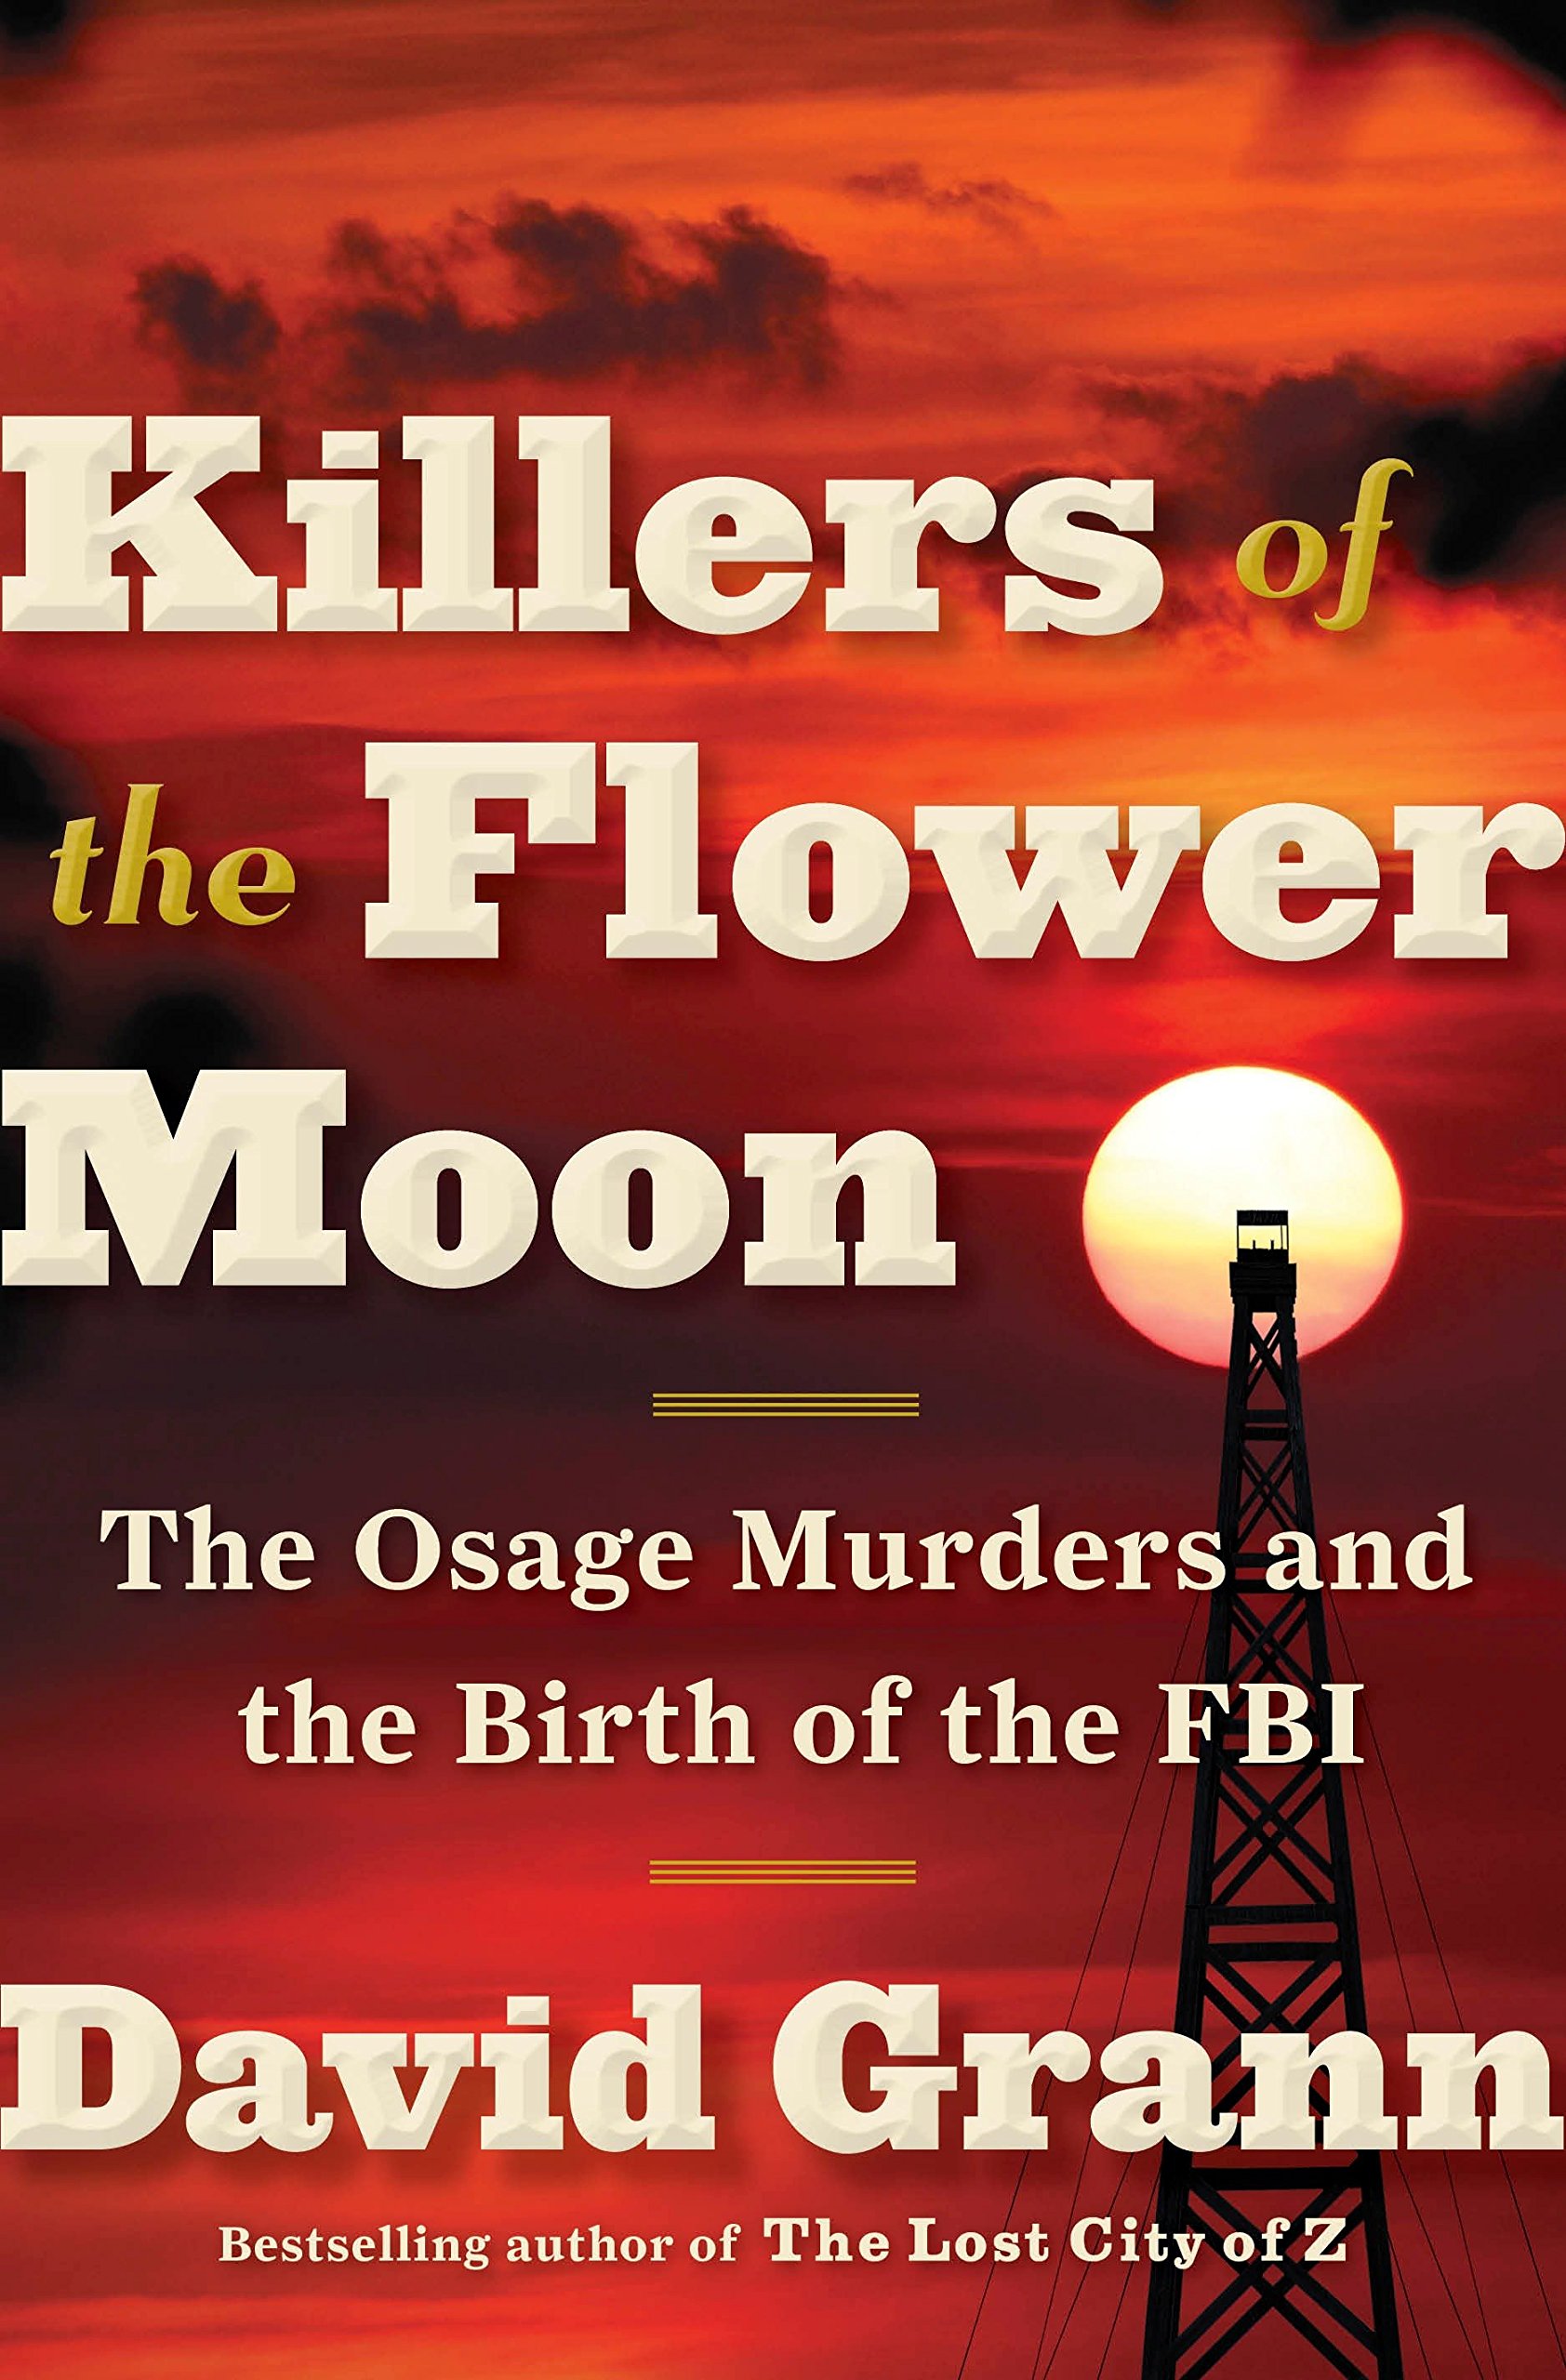 The cover of Killers of the Flower Moon. An oil rig is silhouetted against a full moon with an orange sky as a background.